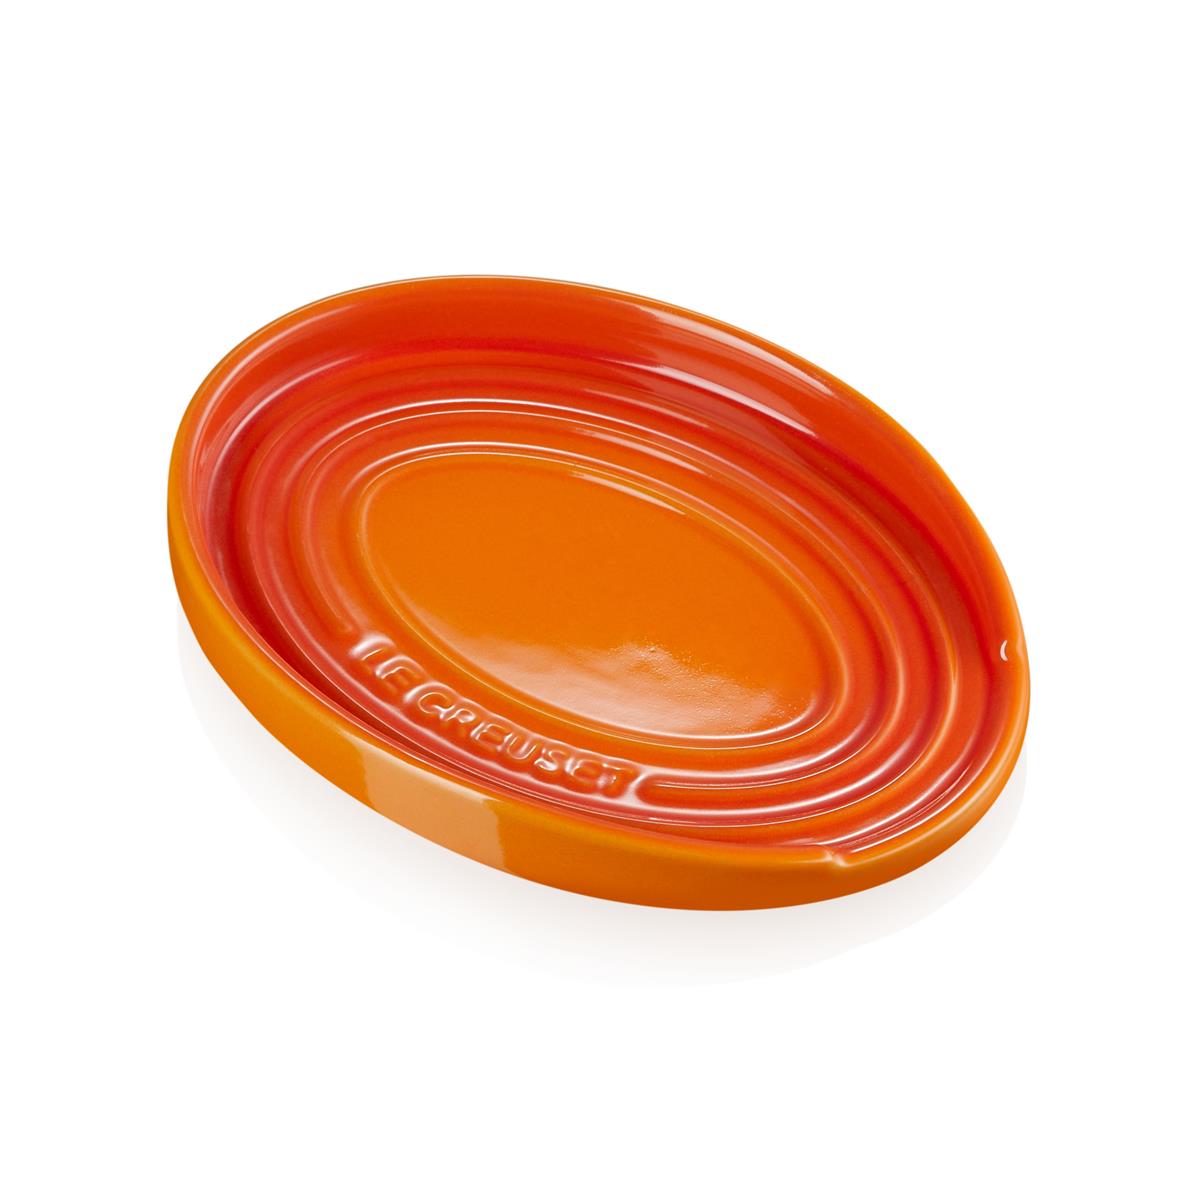 What are the characteristics of the le creuset spoon rest?